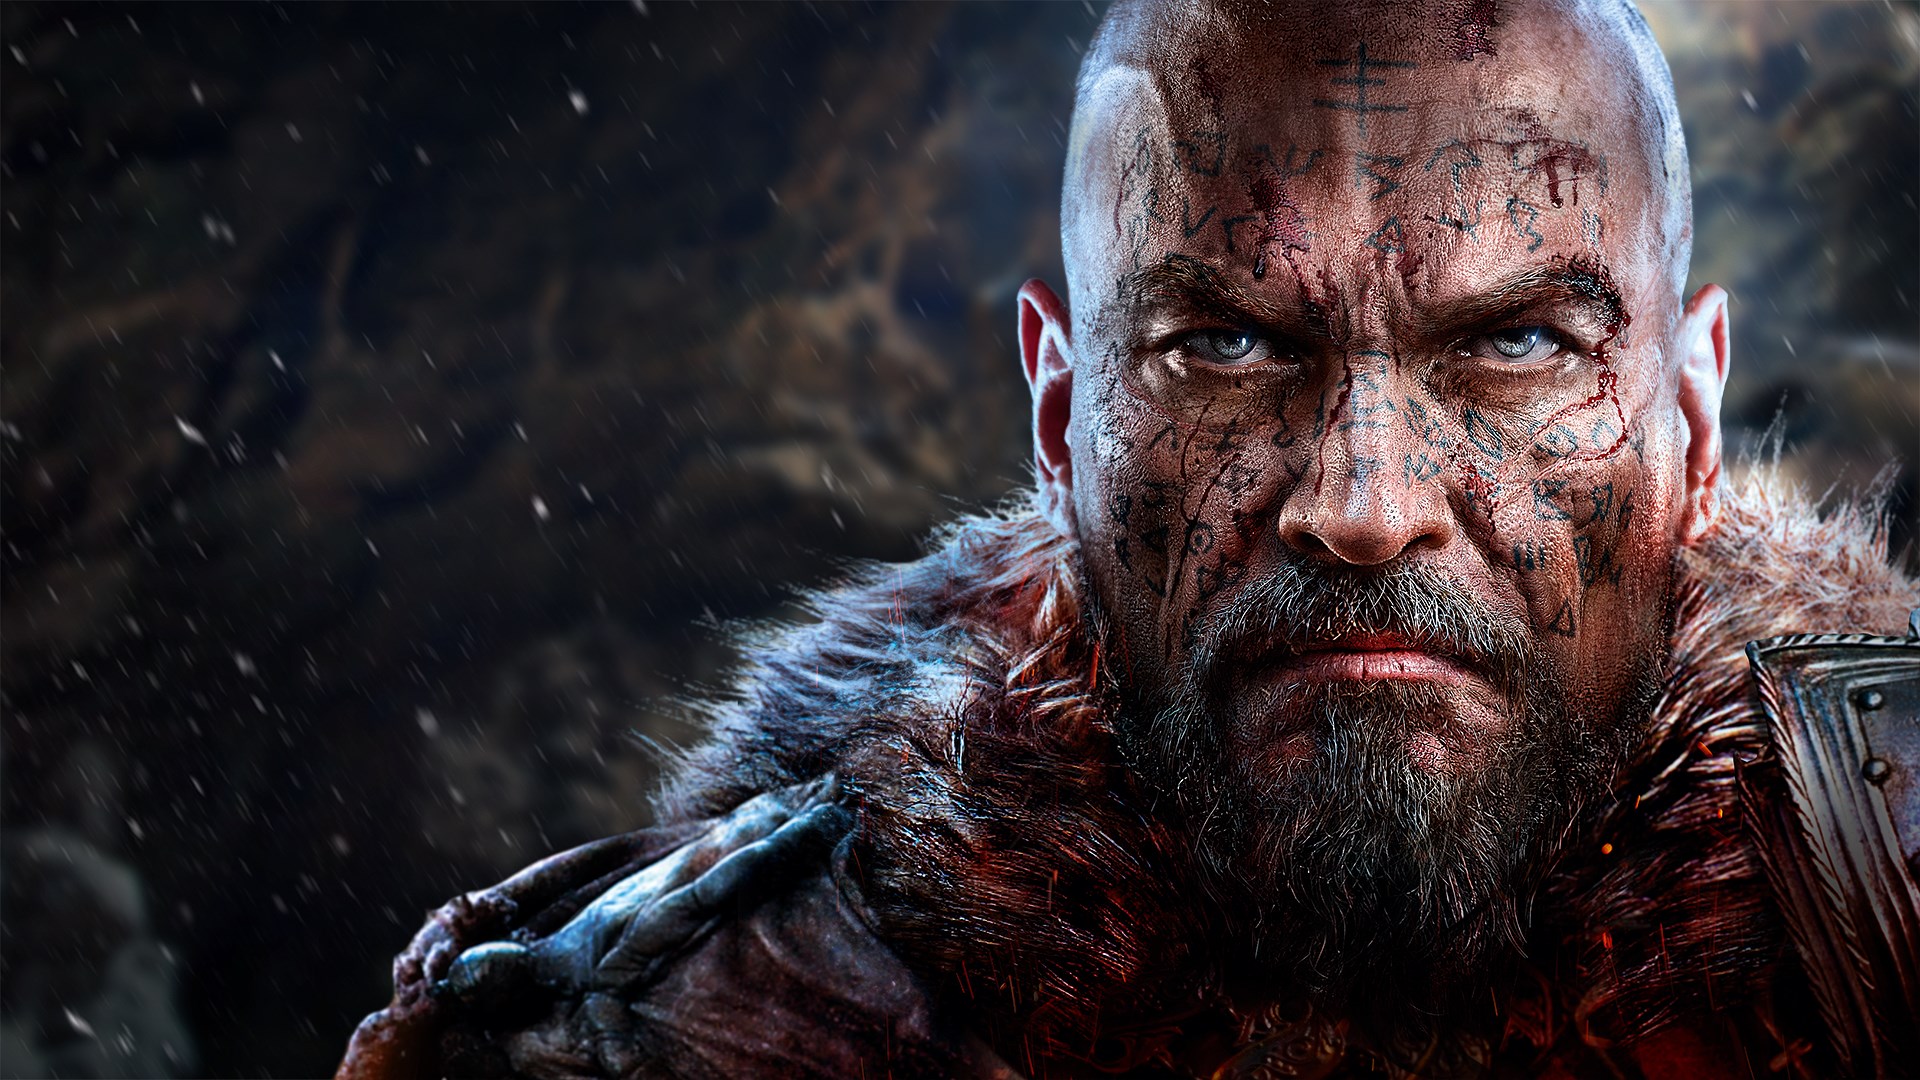 Meet the Enemies of Lords of the Fallen